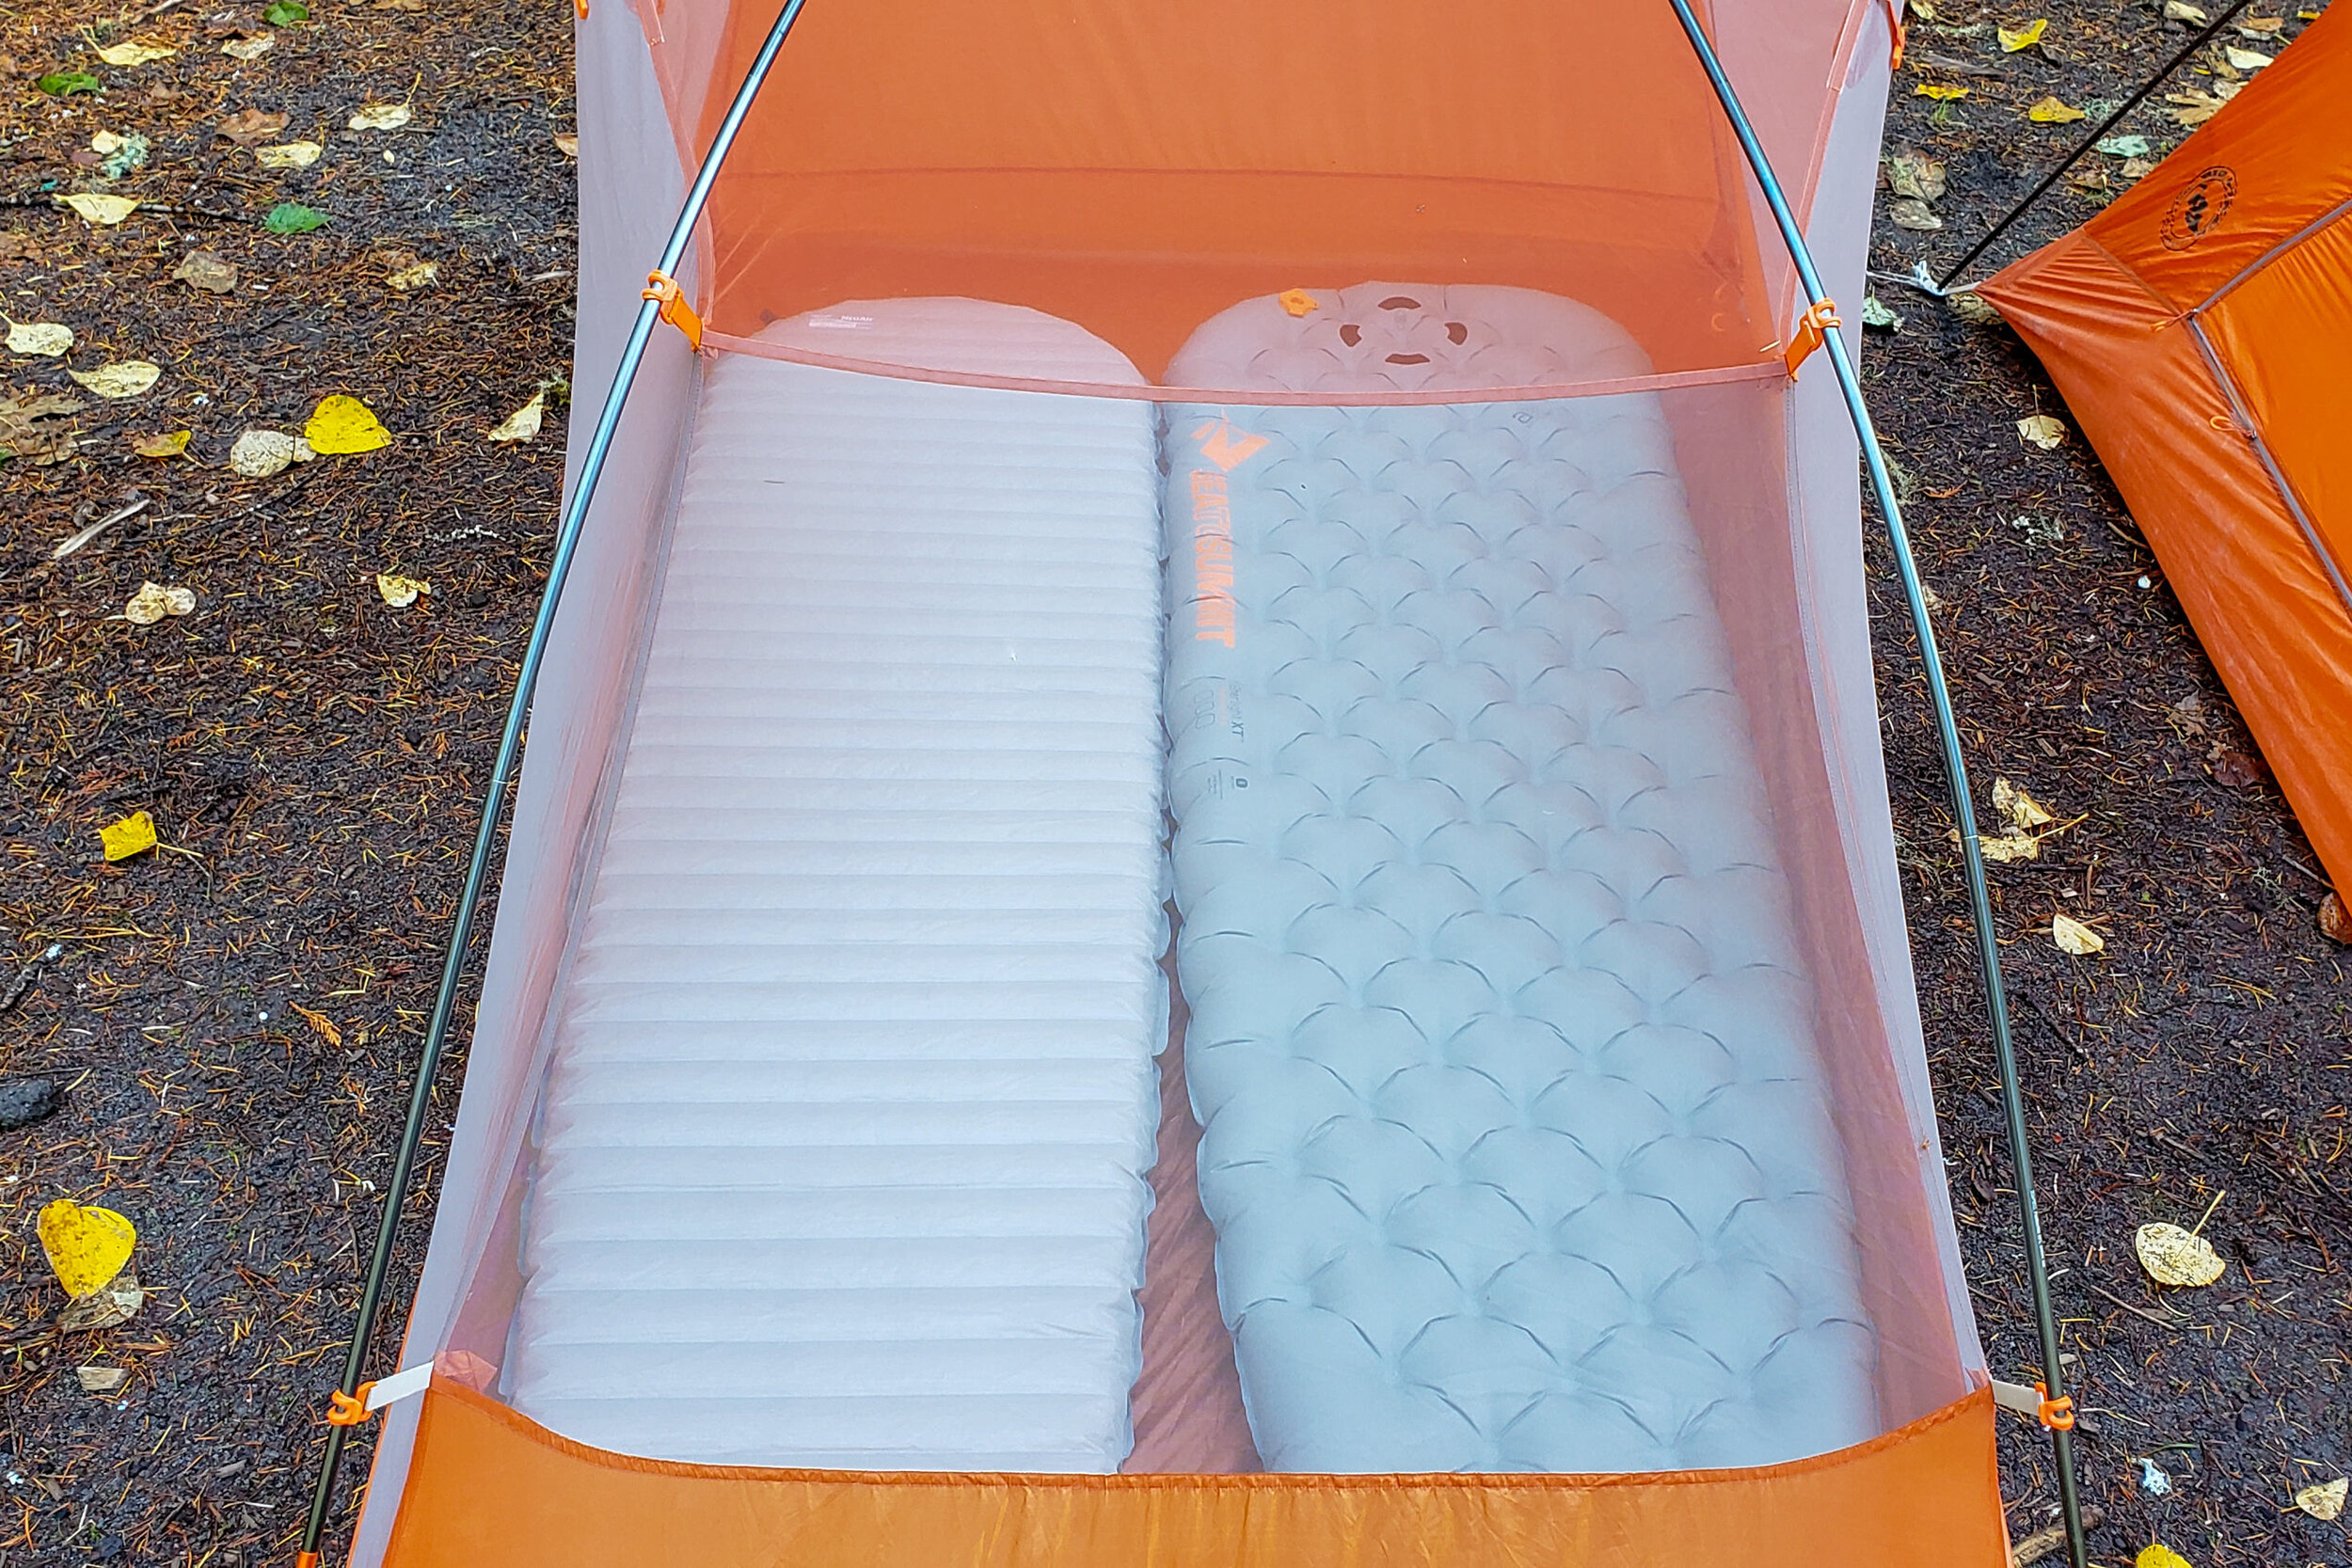 opting for a 2-person tent with regular-sized sleeping pads will save weight, but it may feel tight.